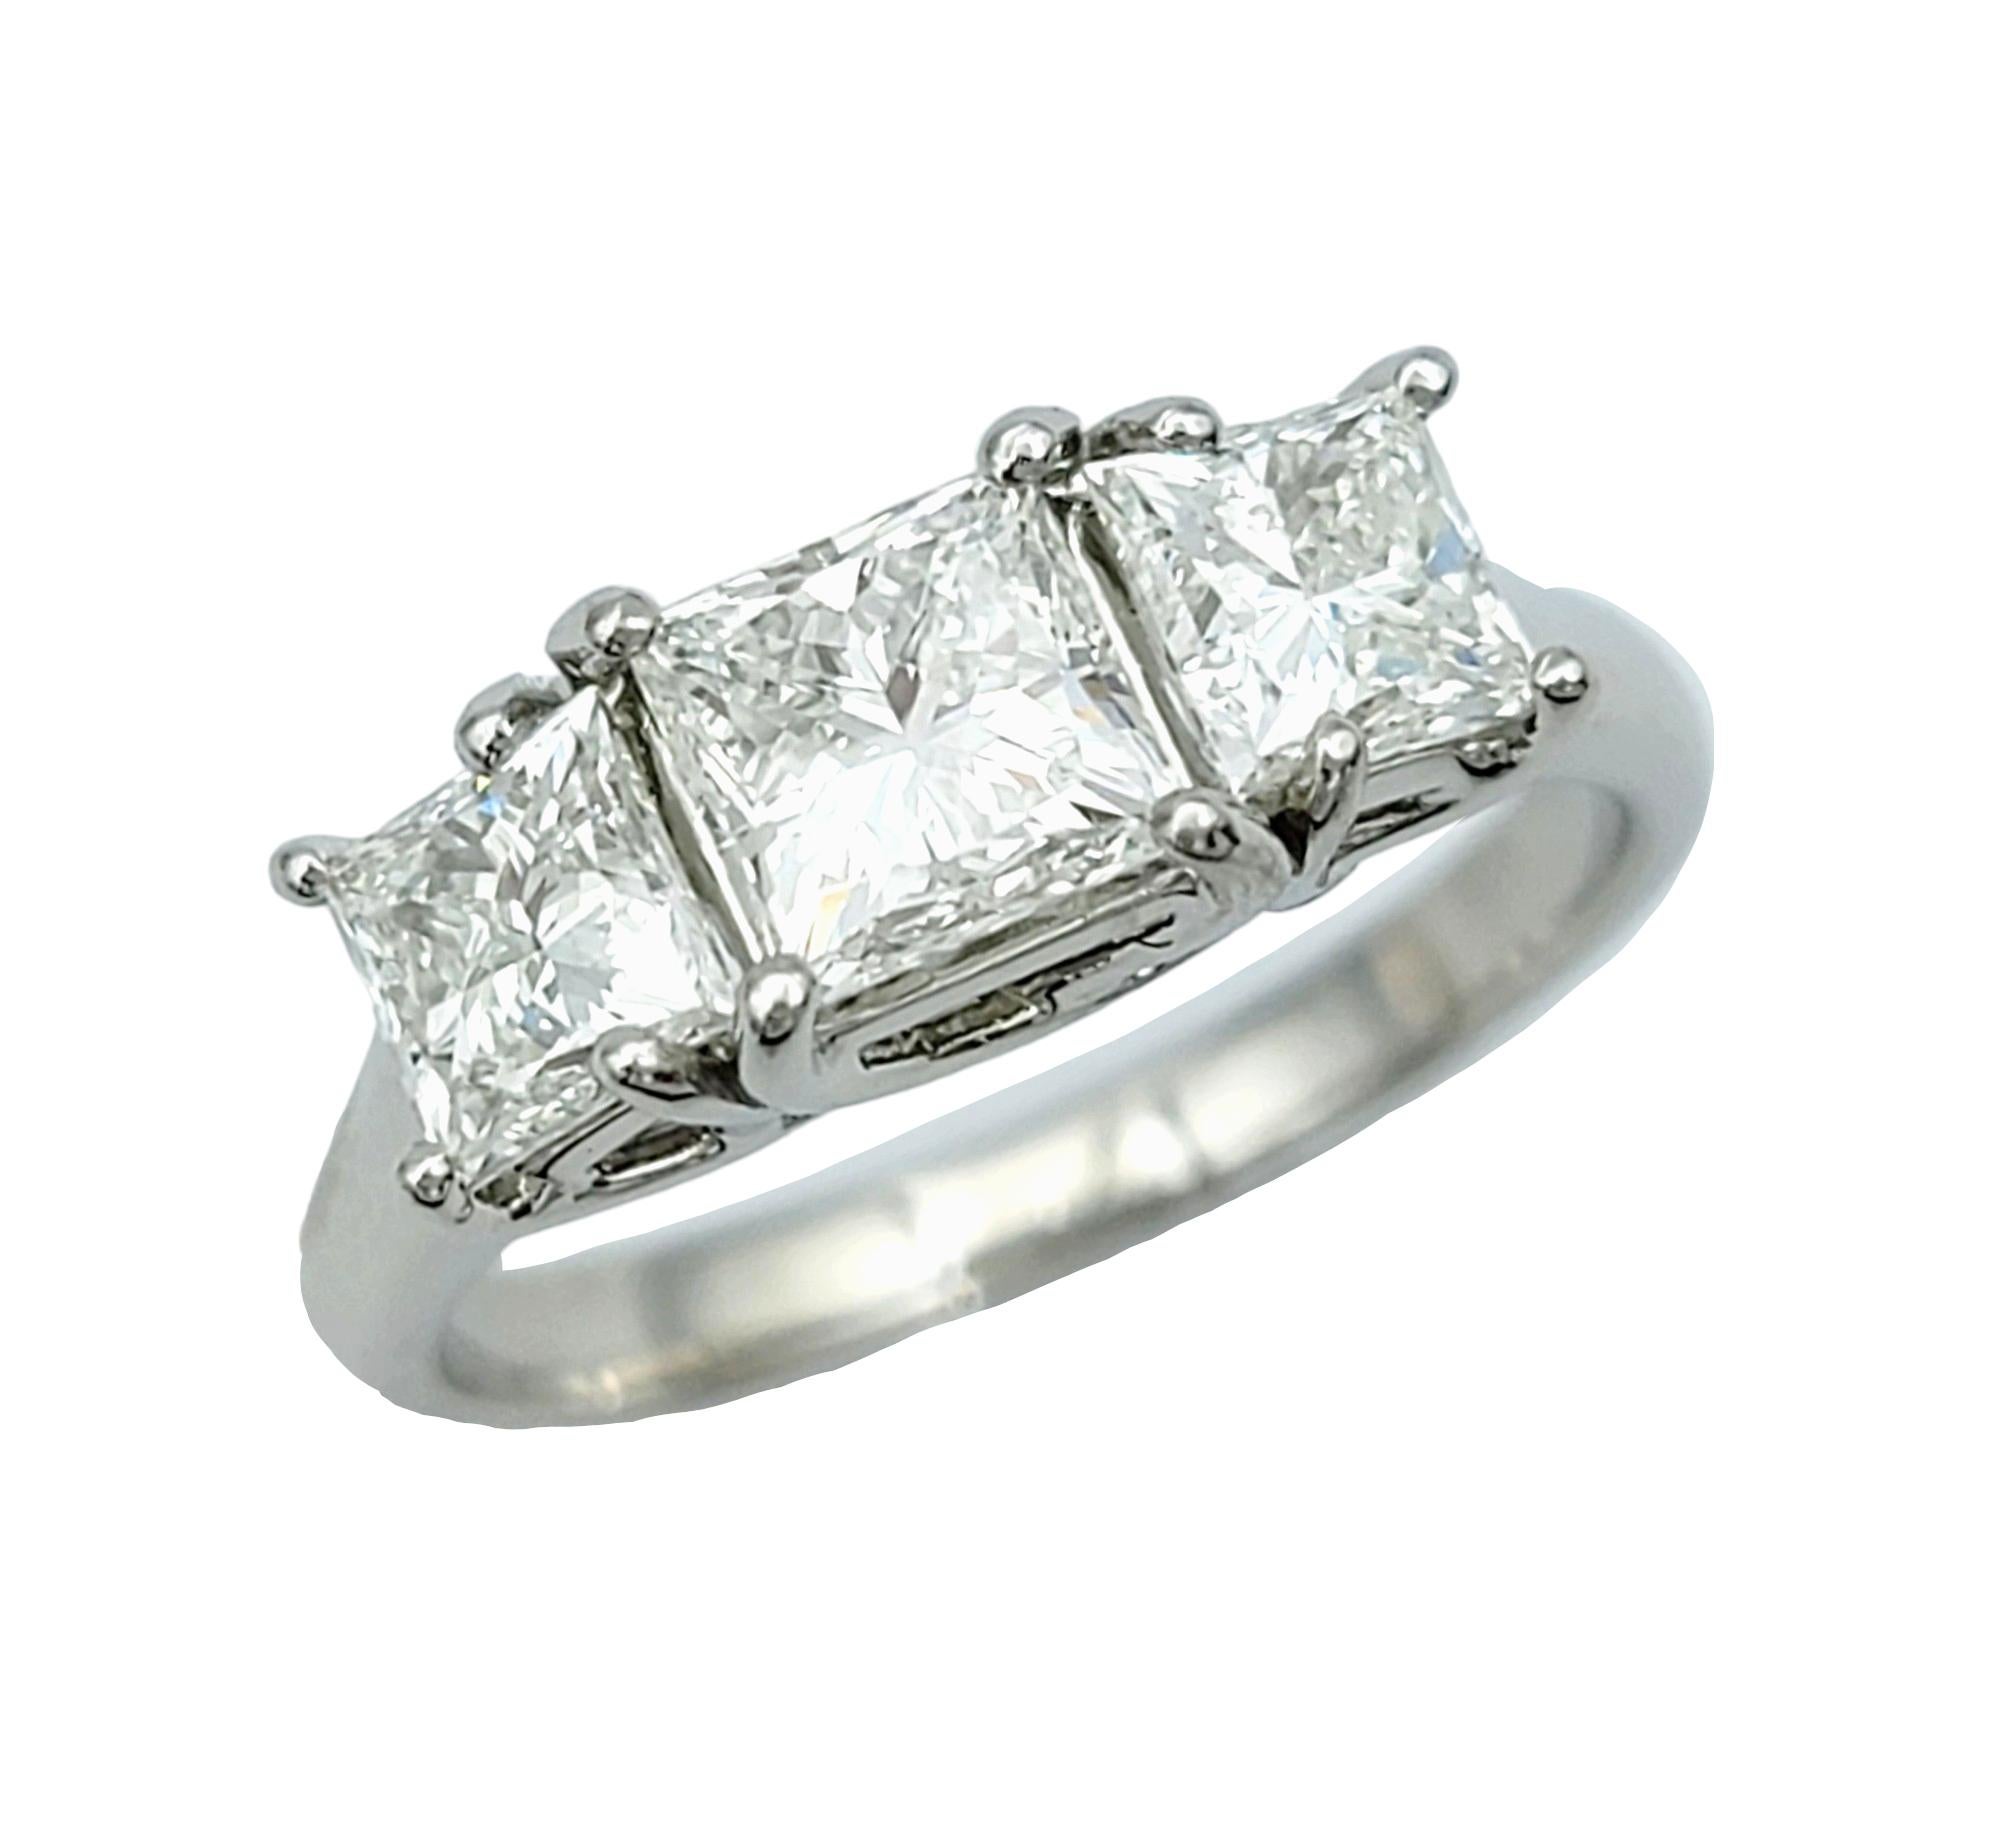 Ring Size: 5.5

This elegant three-stone princess cut diamond ring exudes timeless sophistication. Set in luxurious platinum, the ring boasts a classic yet refined design that captivates with its understated beauty.

The trio of pristine princess